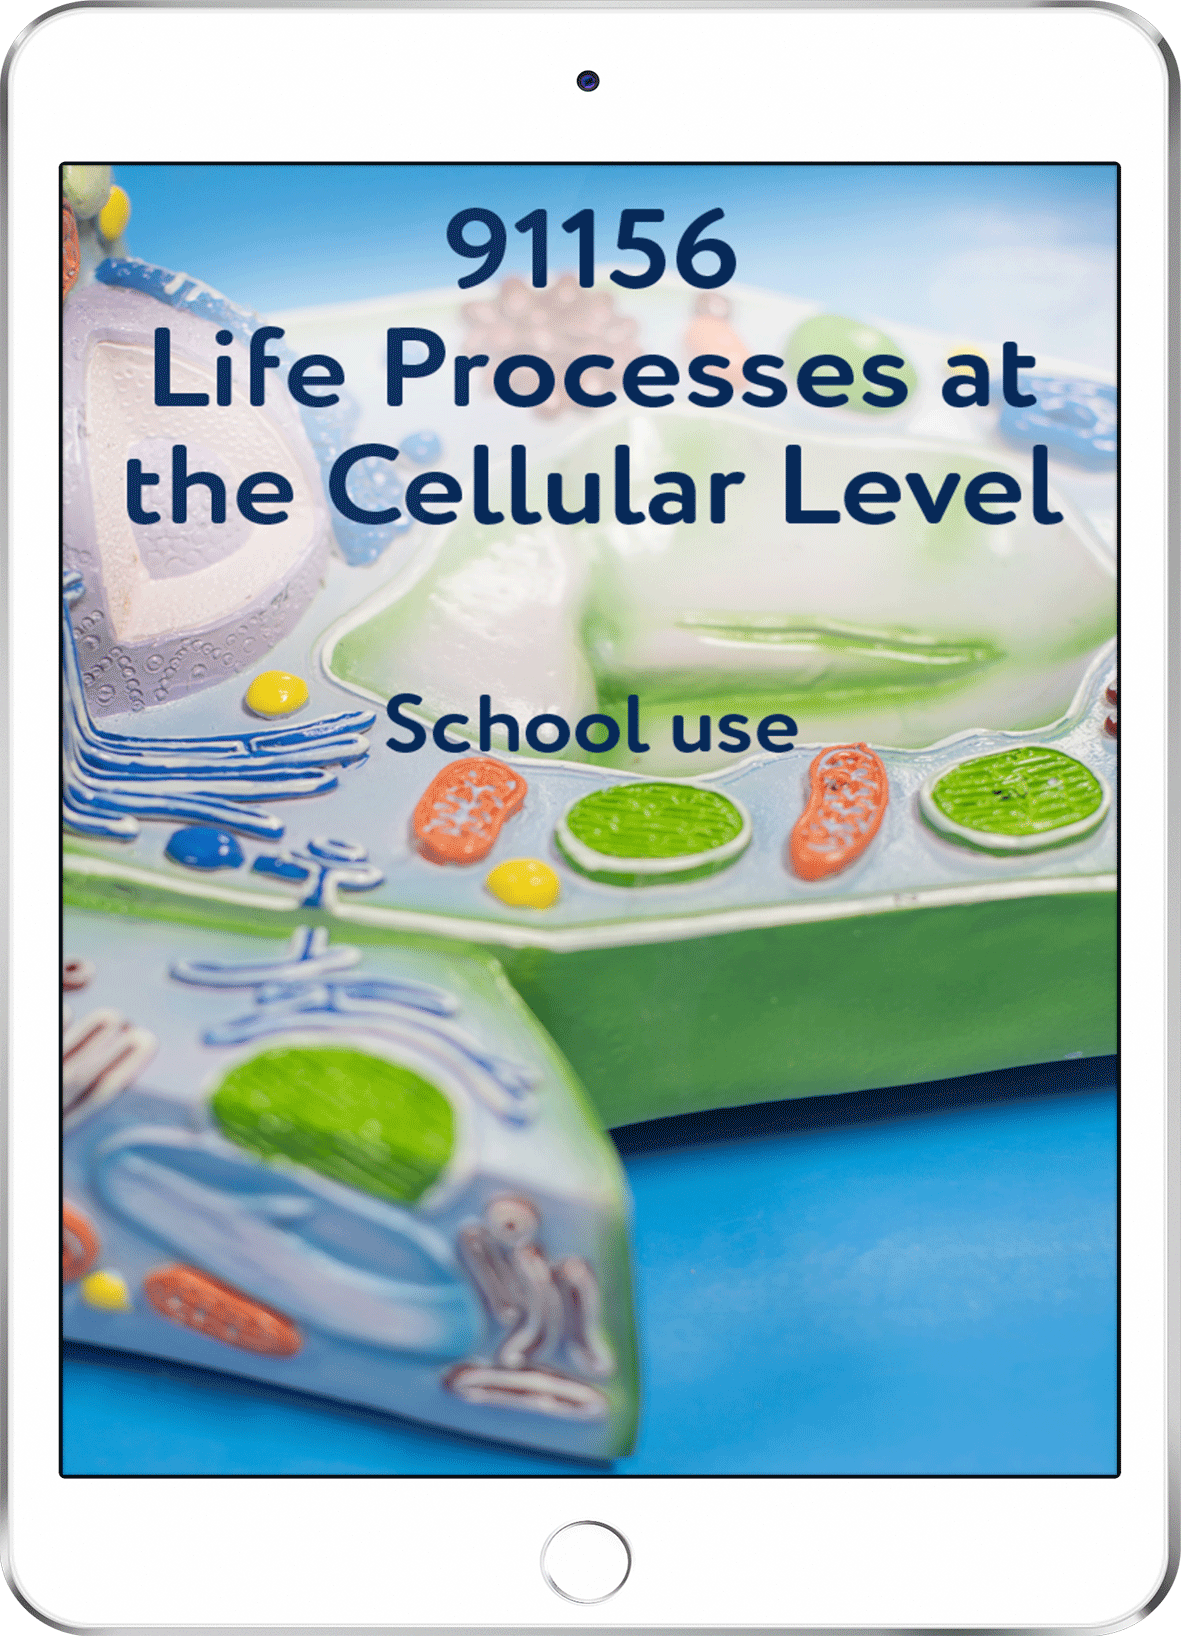 91156 Life Processes at the Cellular Level - School Use